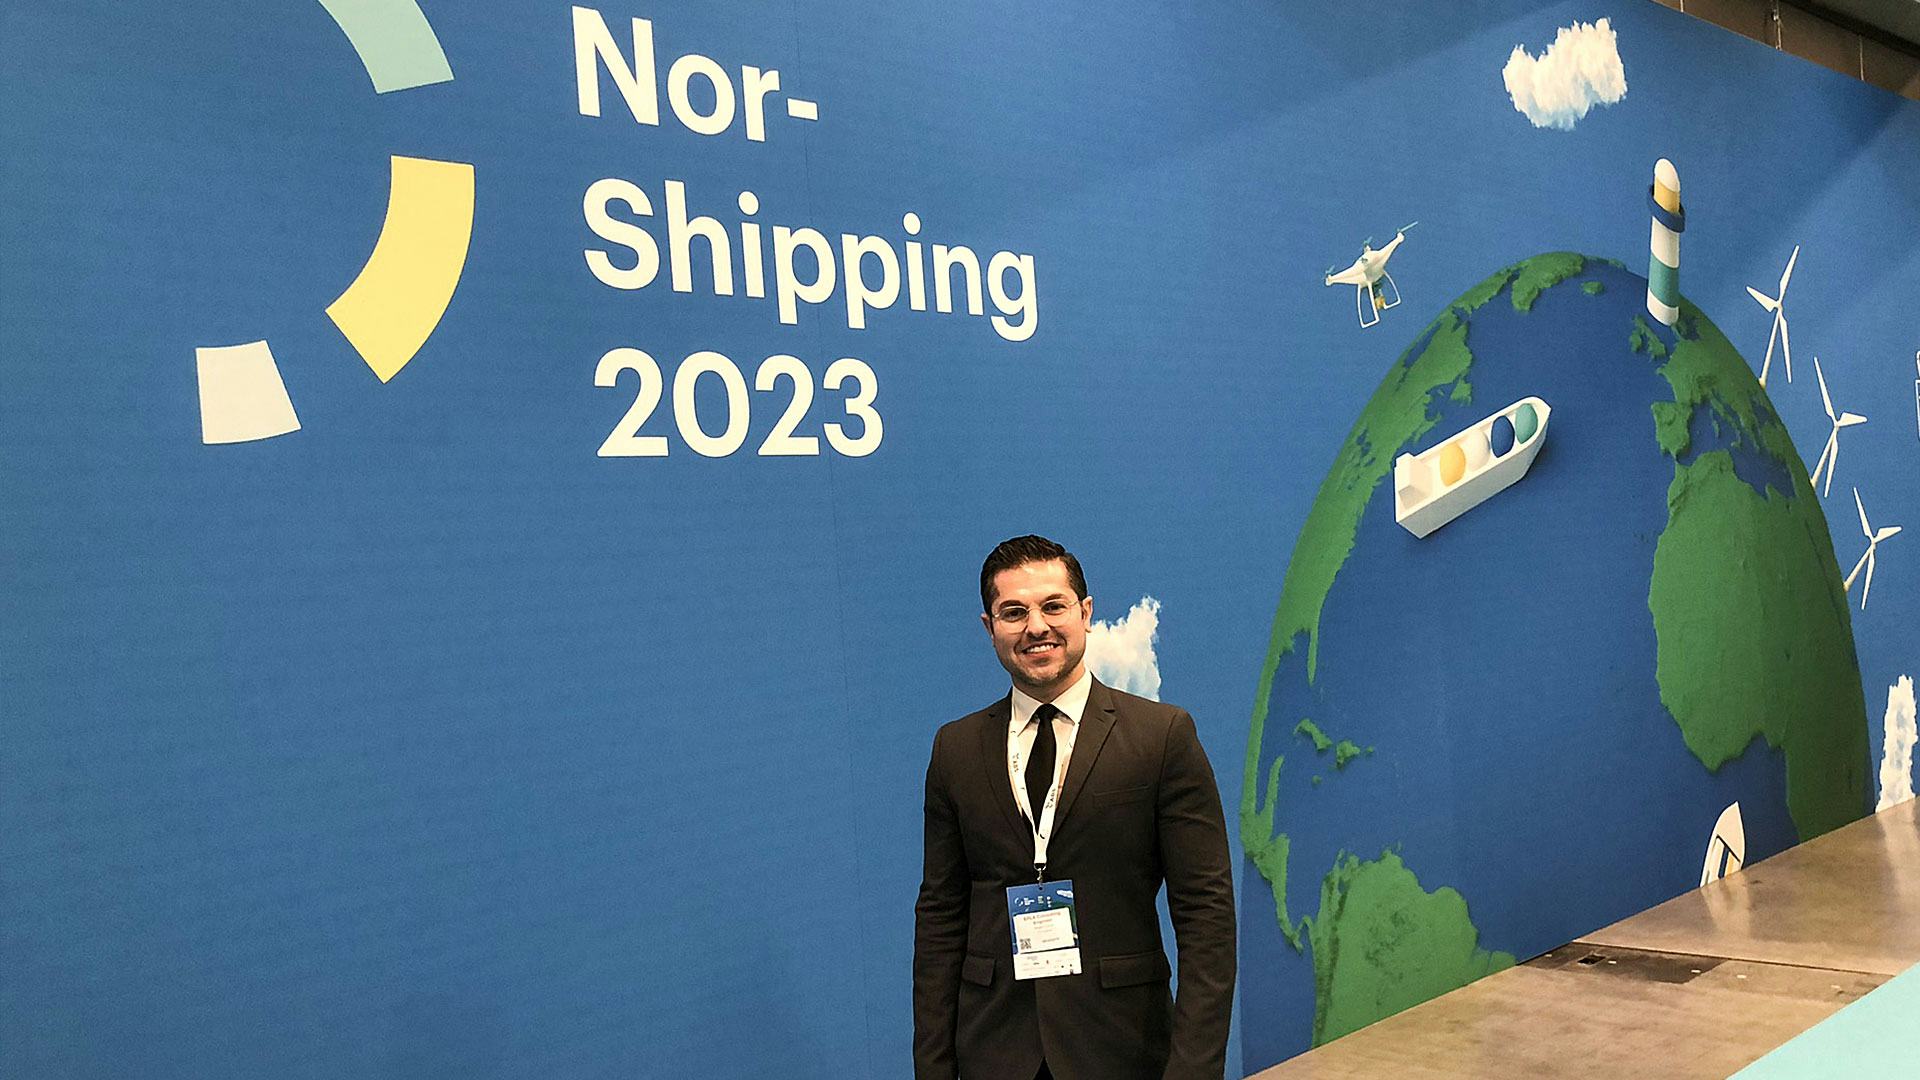 A man in black suit standing in front of Nor-shipping 2023 poster wall